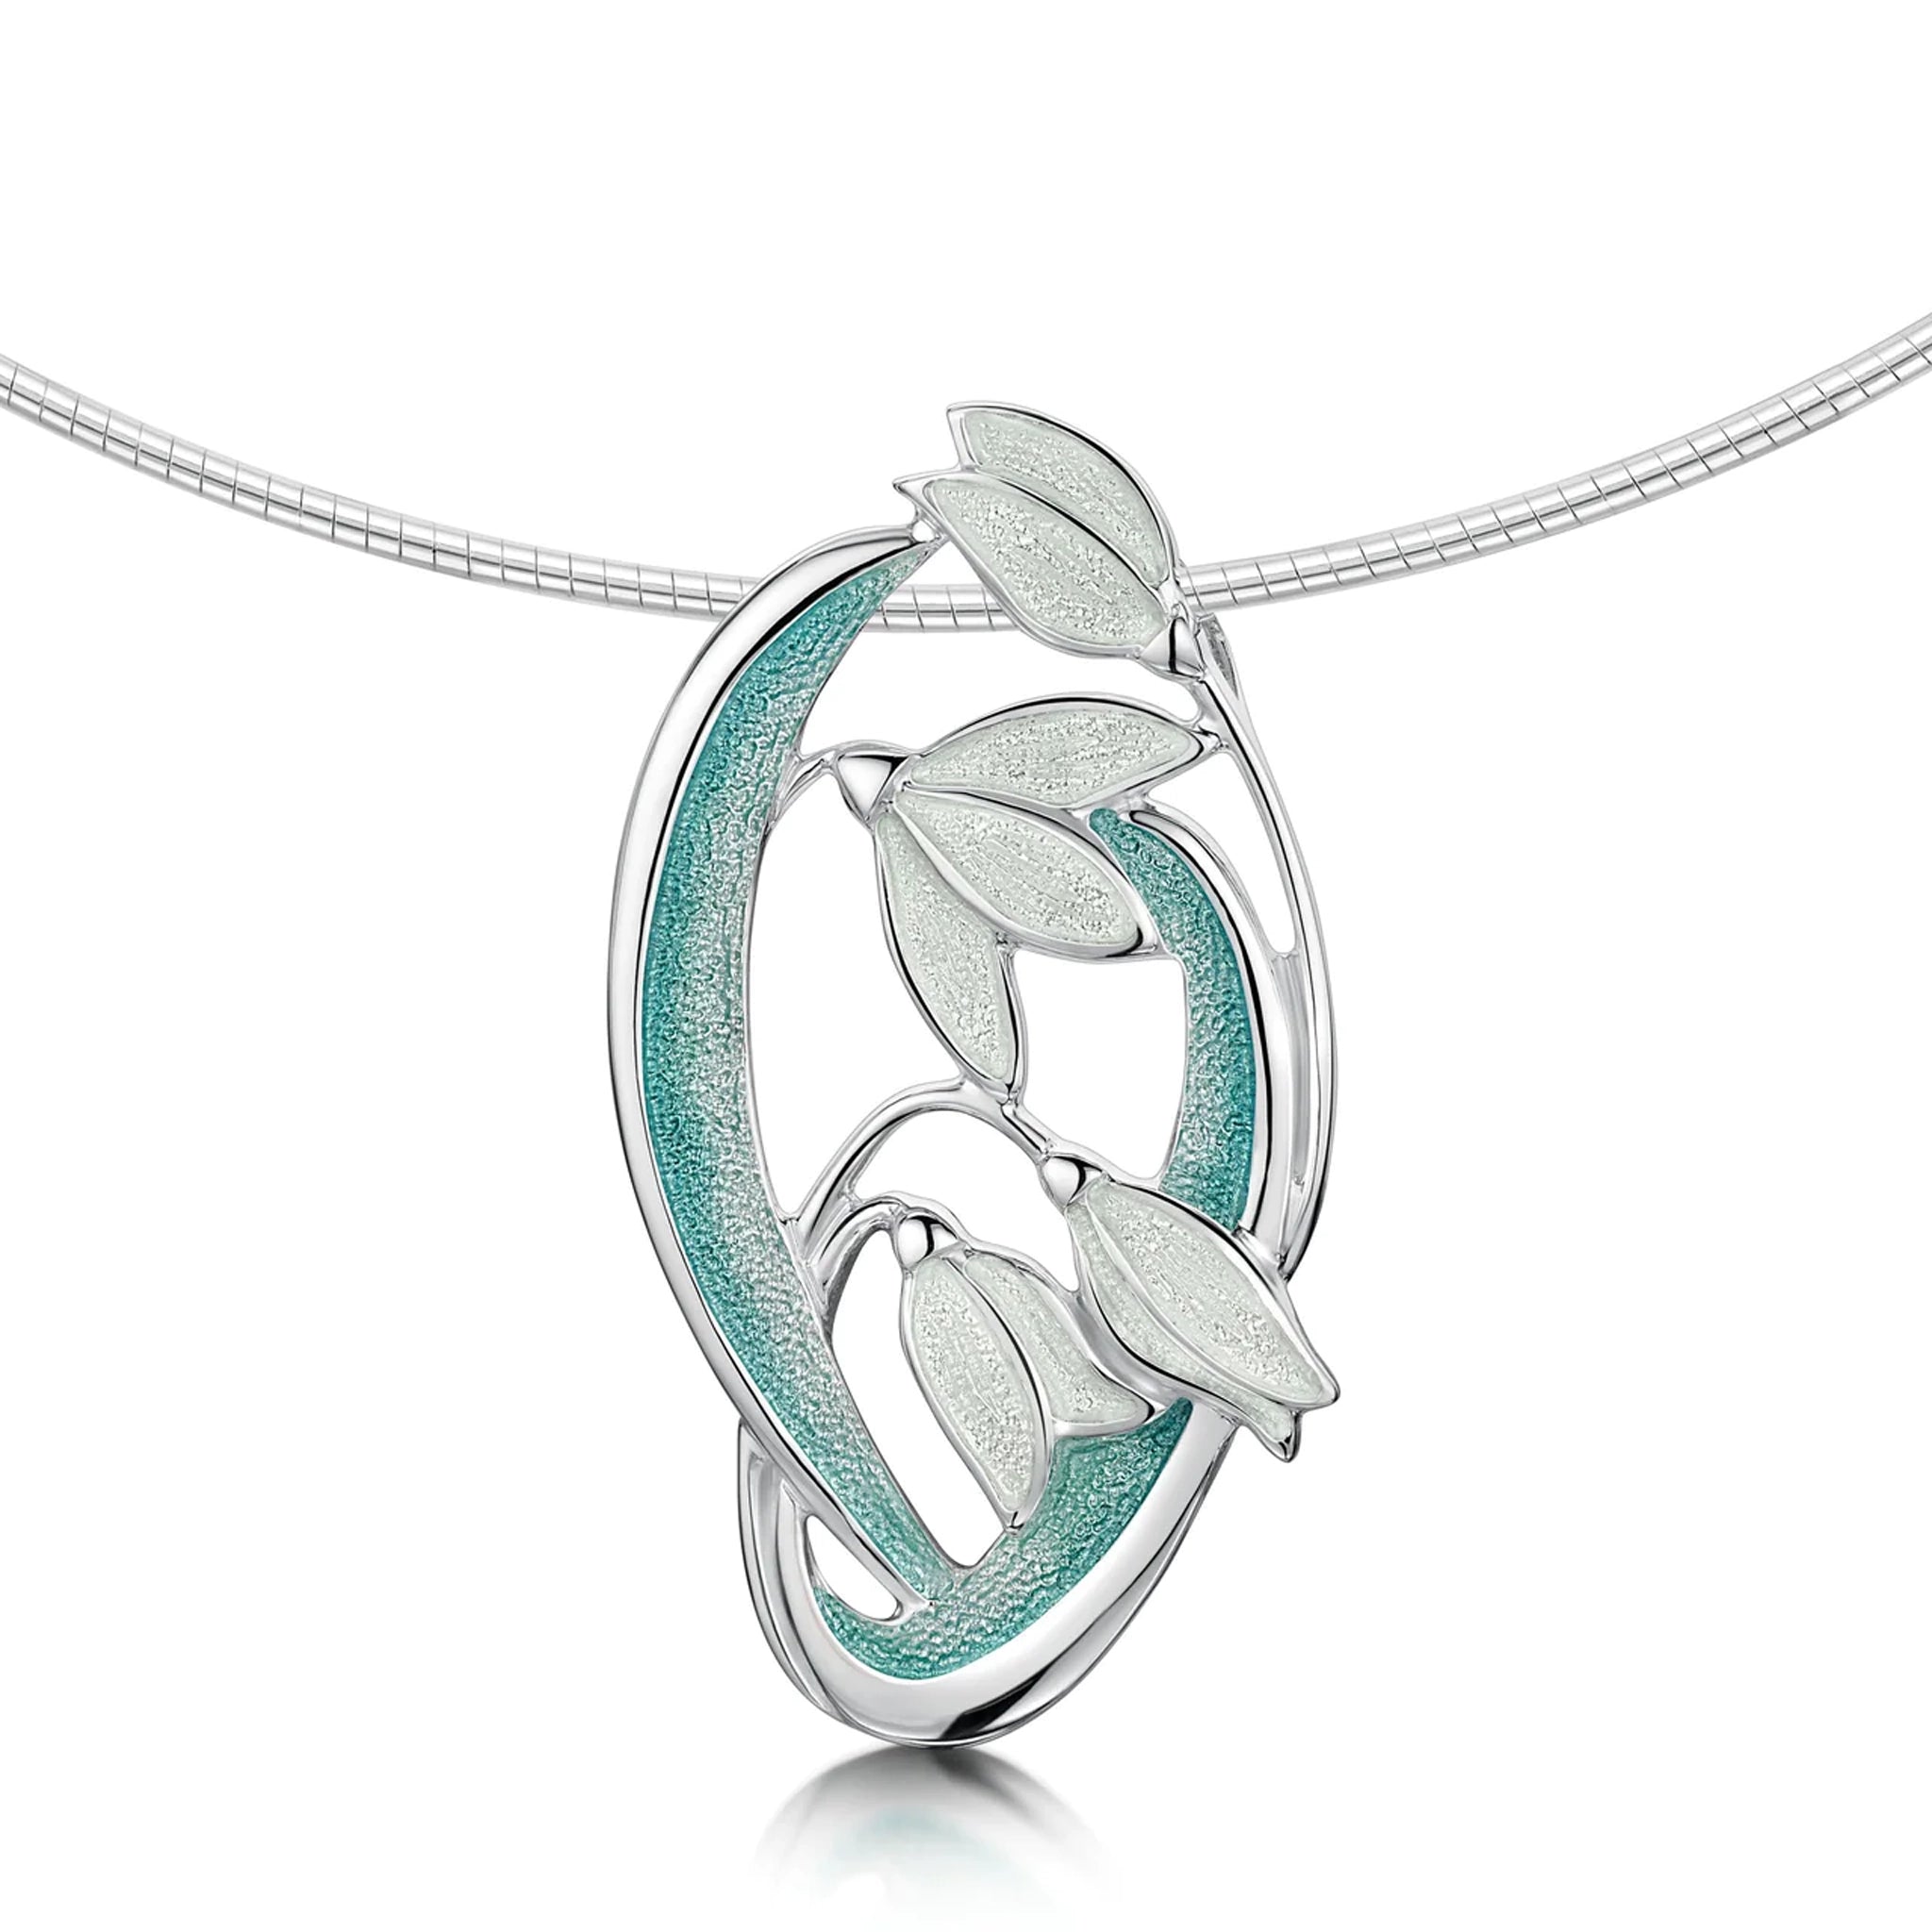 Silver necklet with four snowdrop flowers in an oval shape, with green and white enamel on a silver neck wire